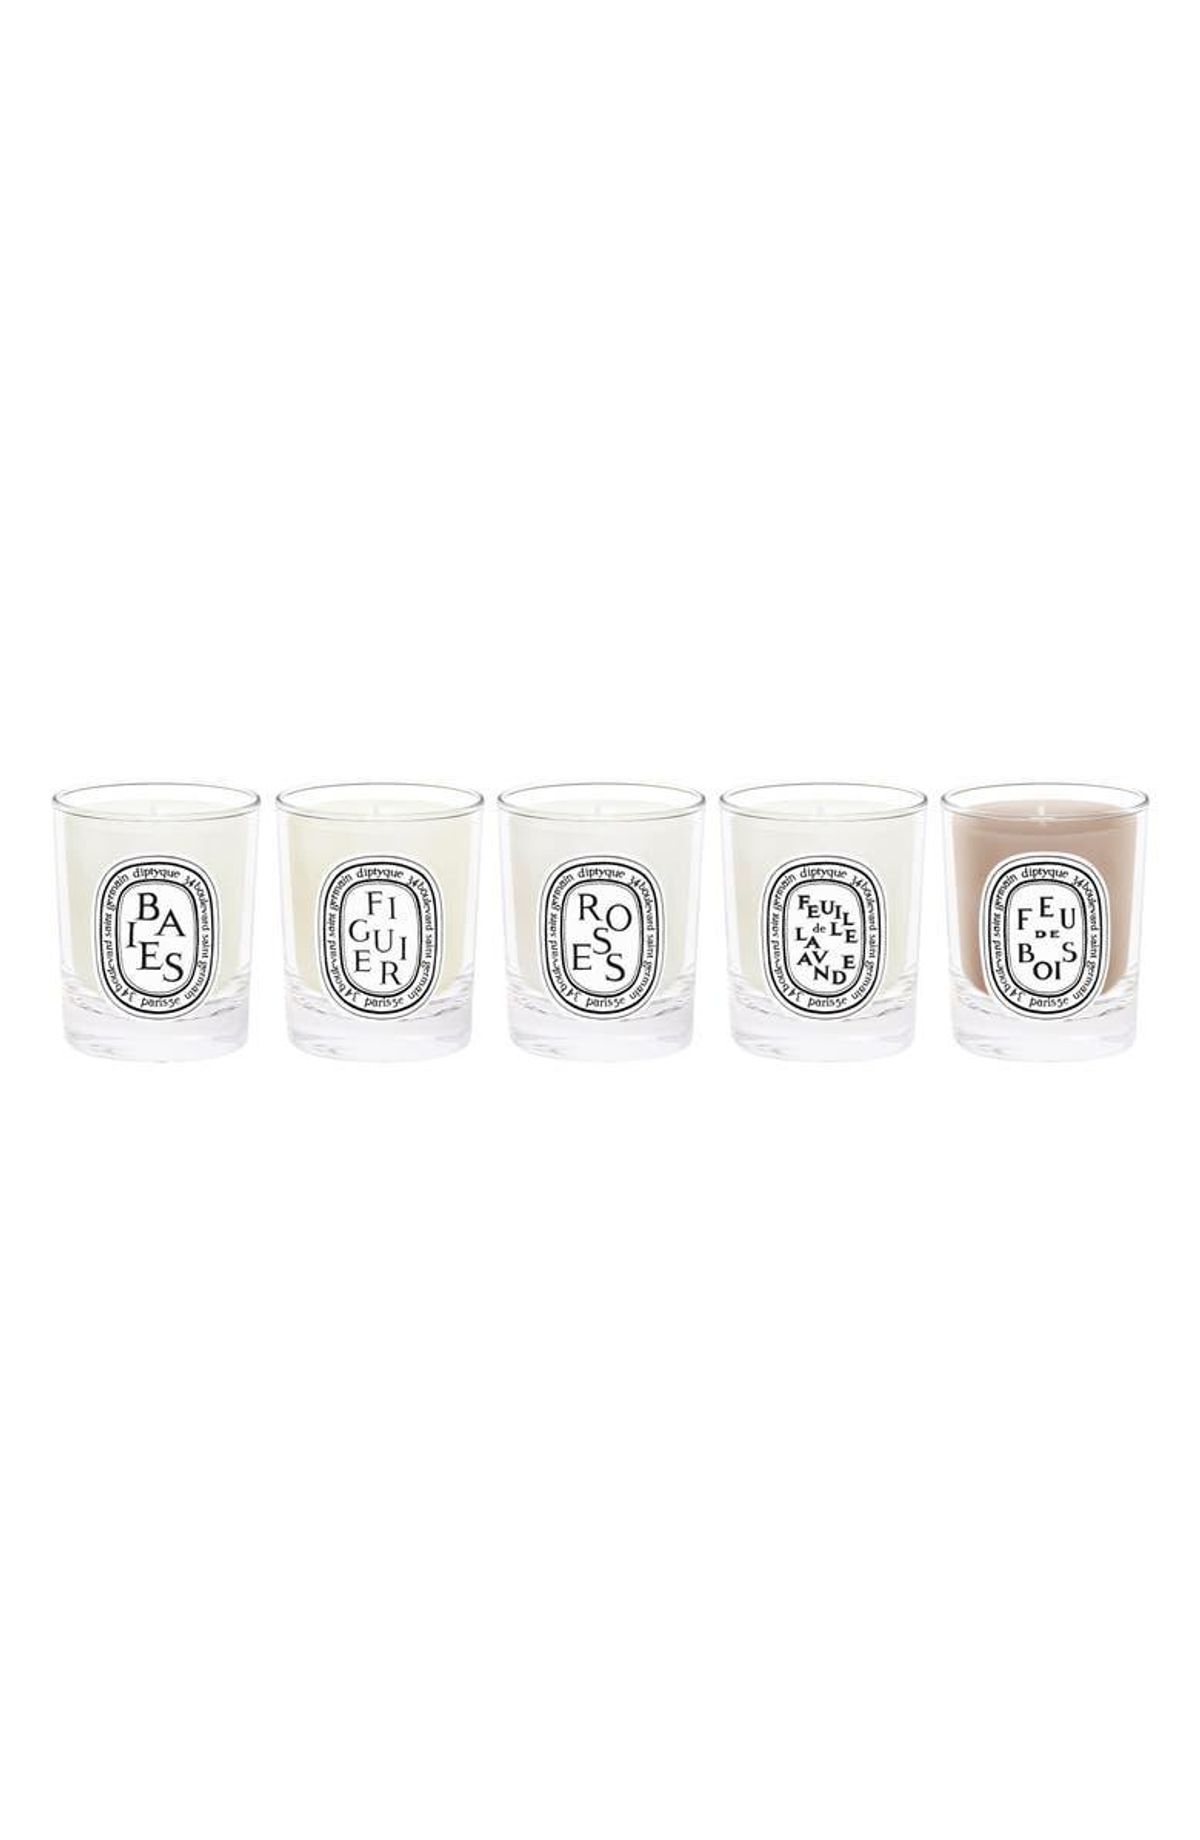 diptyque travel size scented candle set